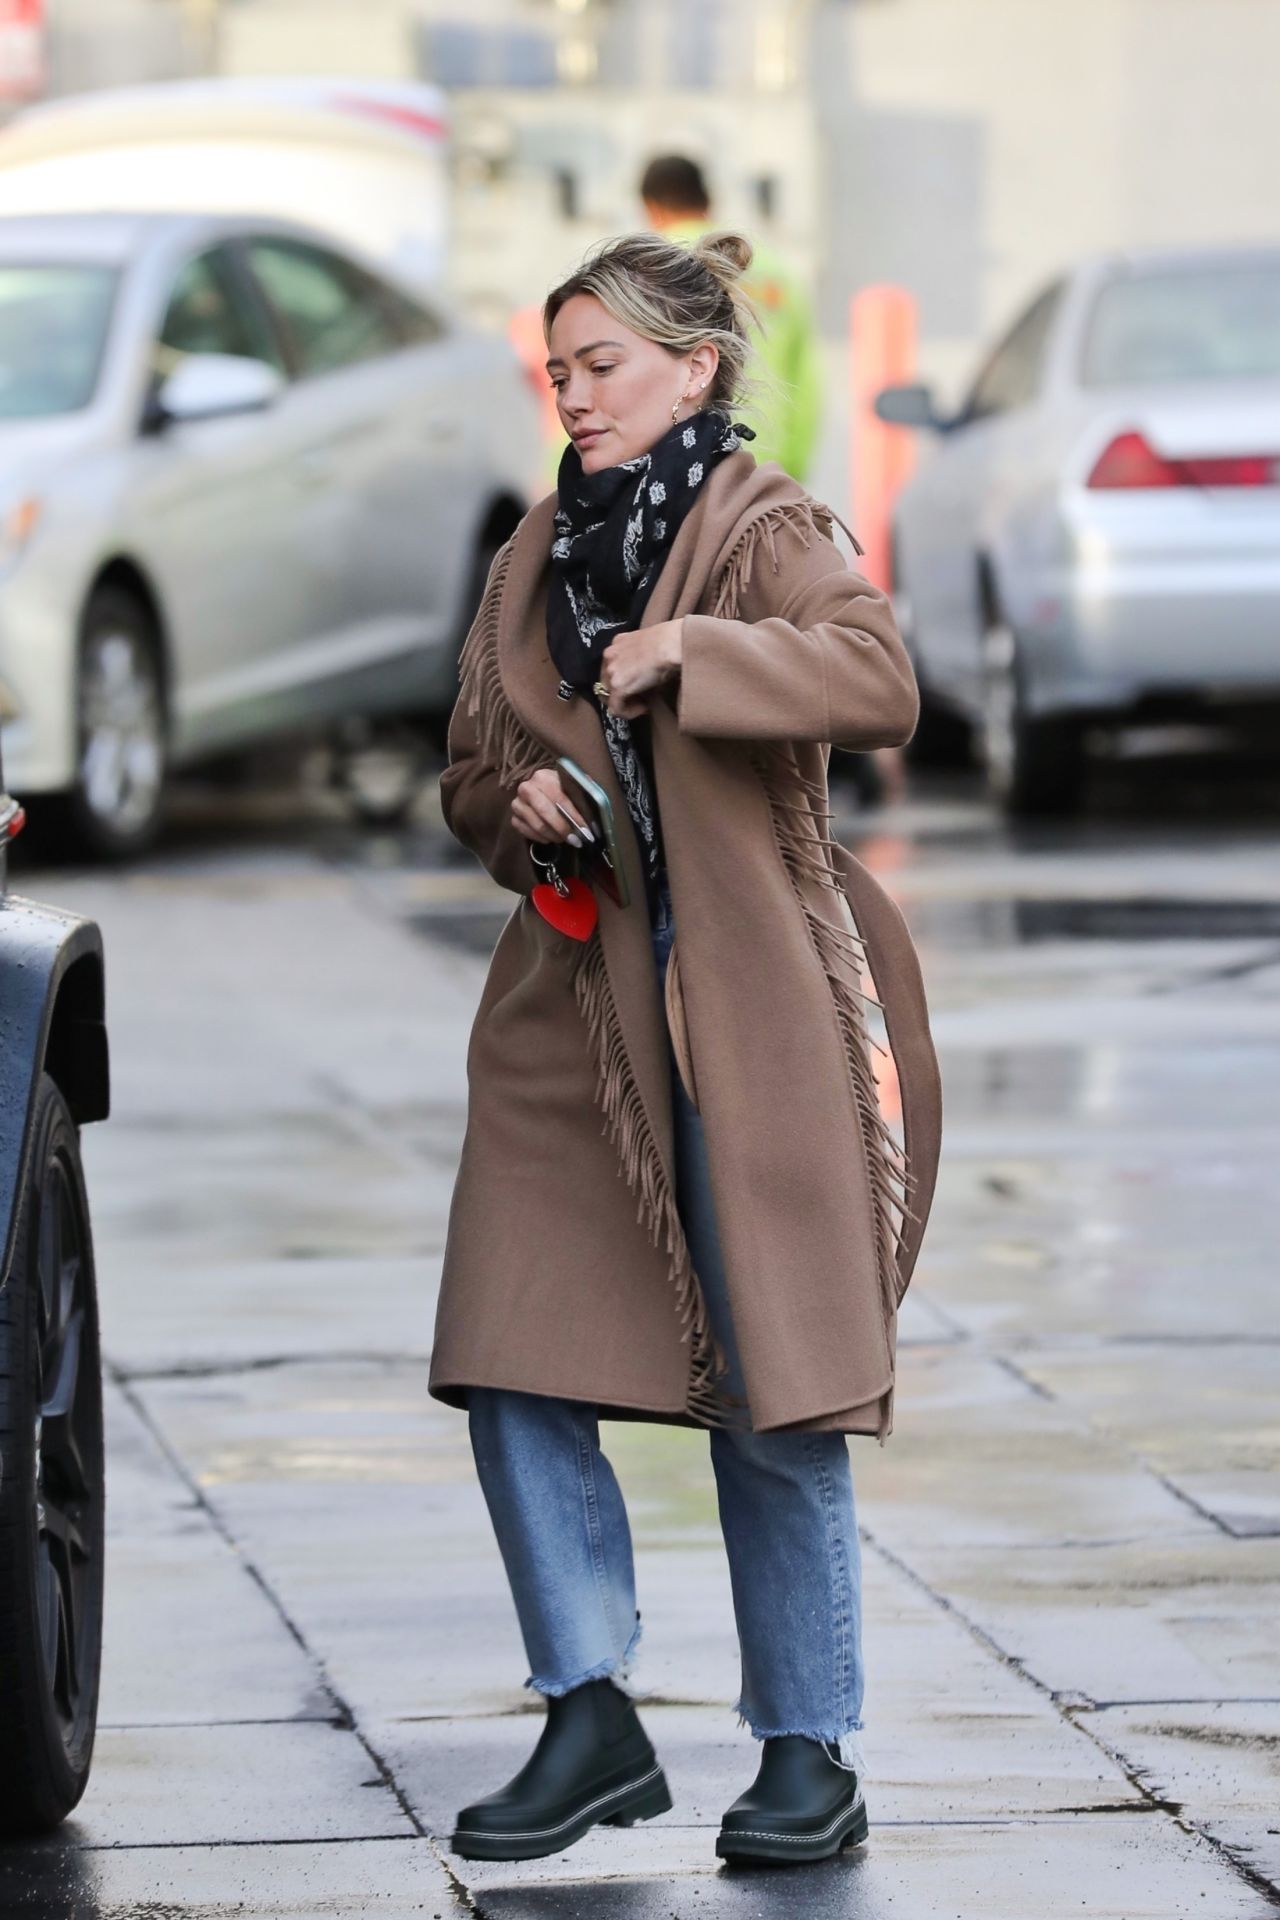 Hilary Duff departs from the airport carrying luggage from Louis Vuitton  and a scarf from Acne, Stock Photo, Picture And Rights Managed Image.  Pic. WEN-WENN29997615